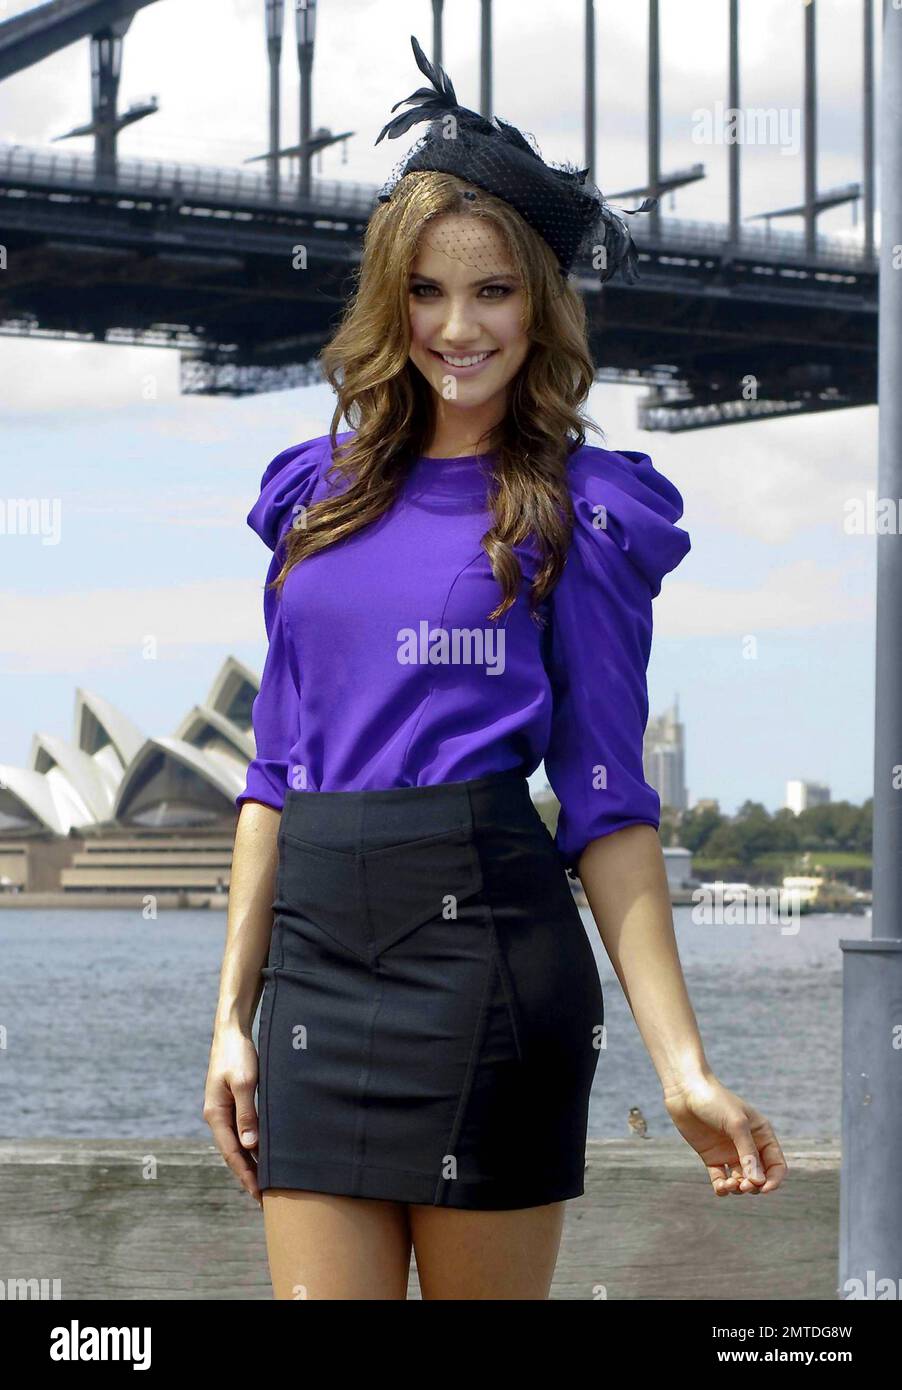 Miss Universe Australia 2009 and third runner up for the 2009 Miss Universe title Rachael Finch poses for photos with the iconic Sydney Opera House in the background. Sydney, Australia. 3/15/10.   . Stock Photo